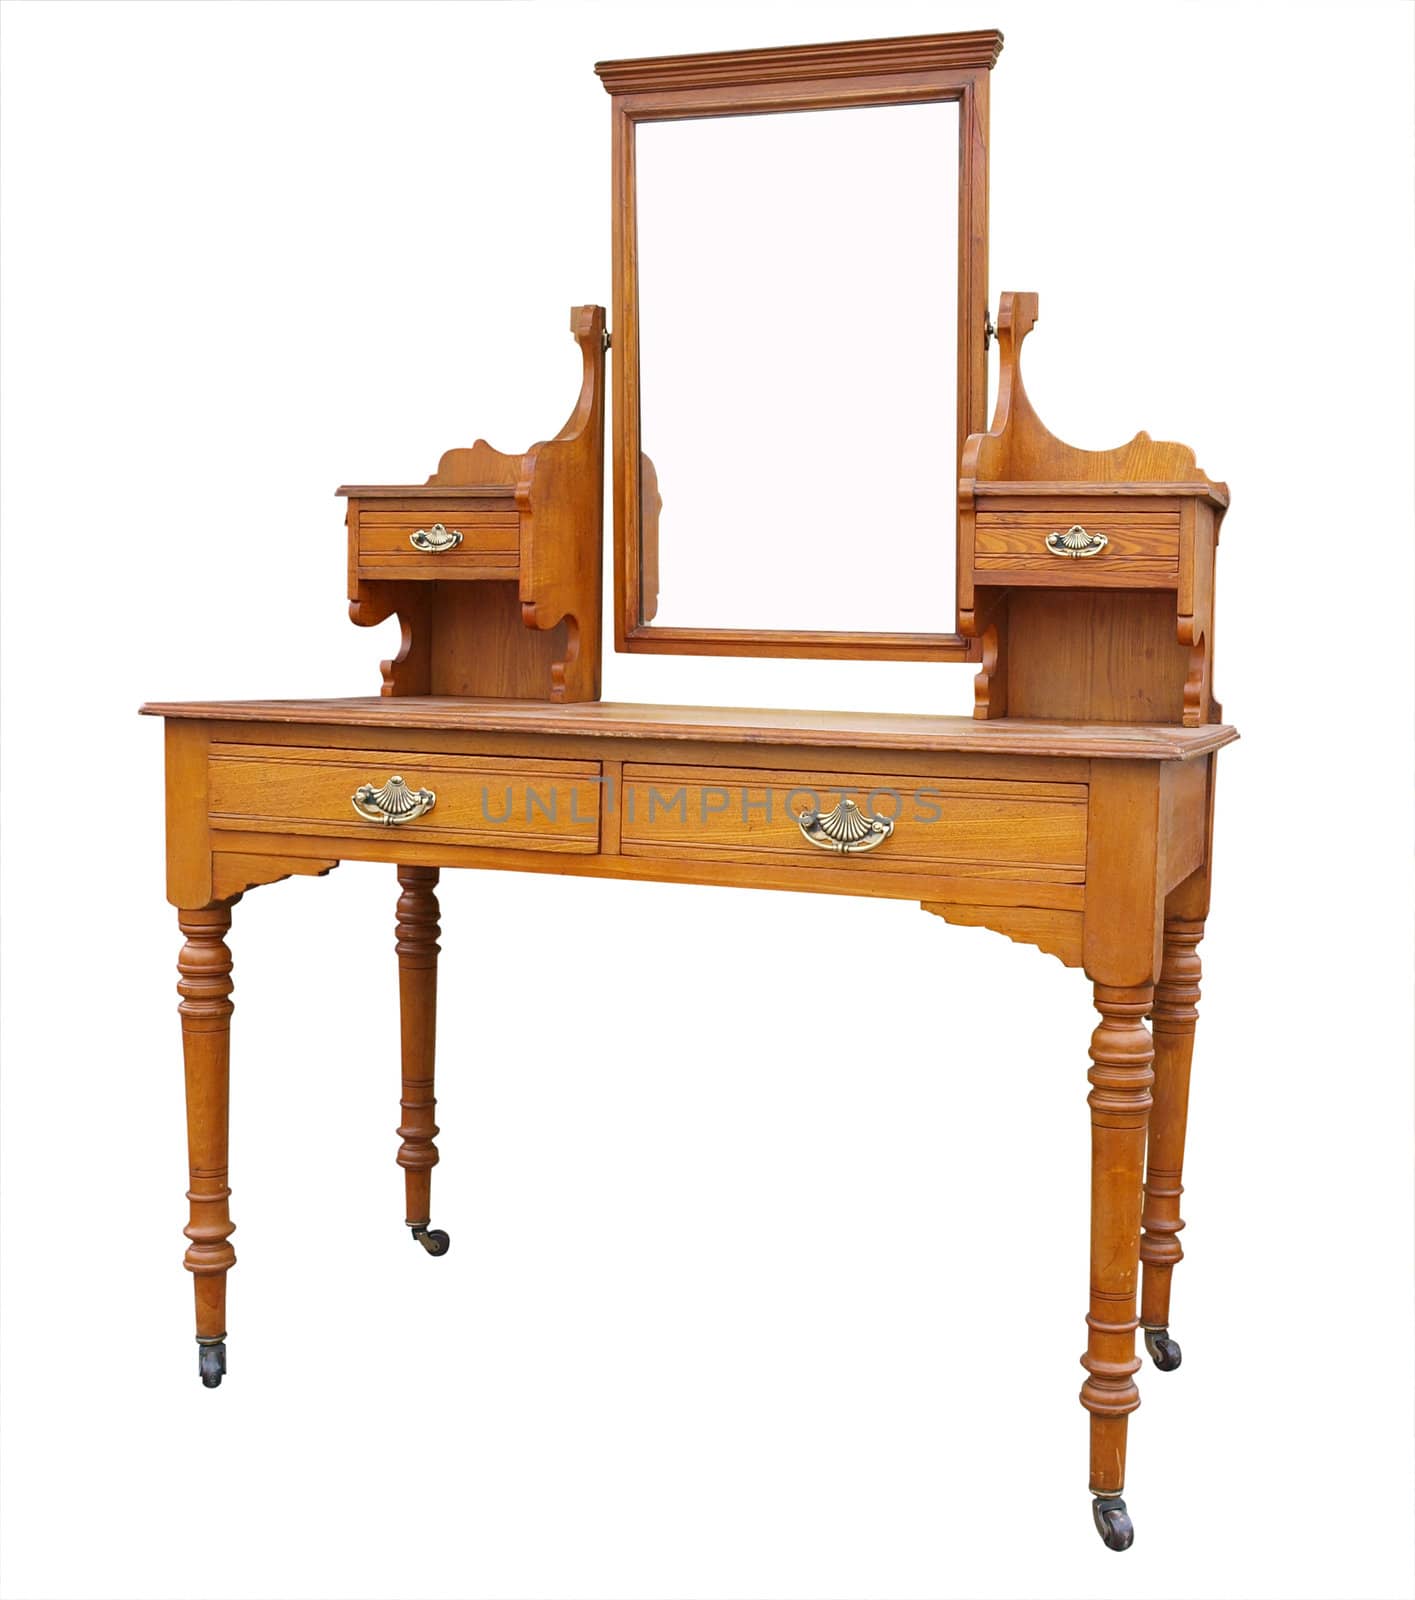 Antique Dressing Table with Mirror by MargoJH